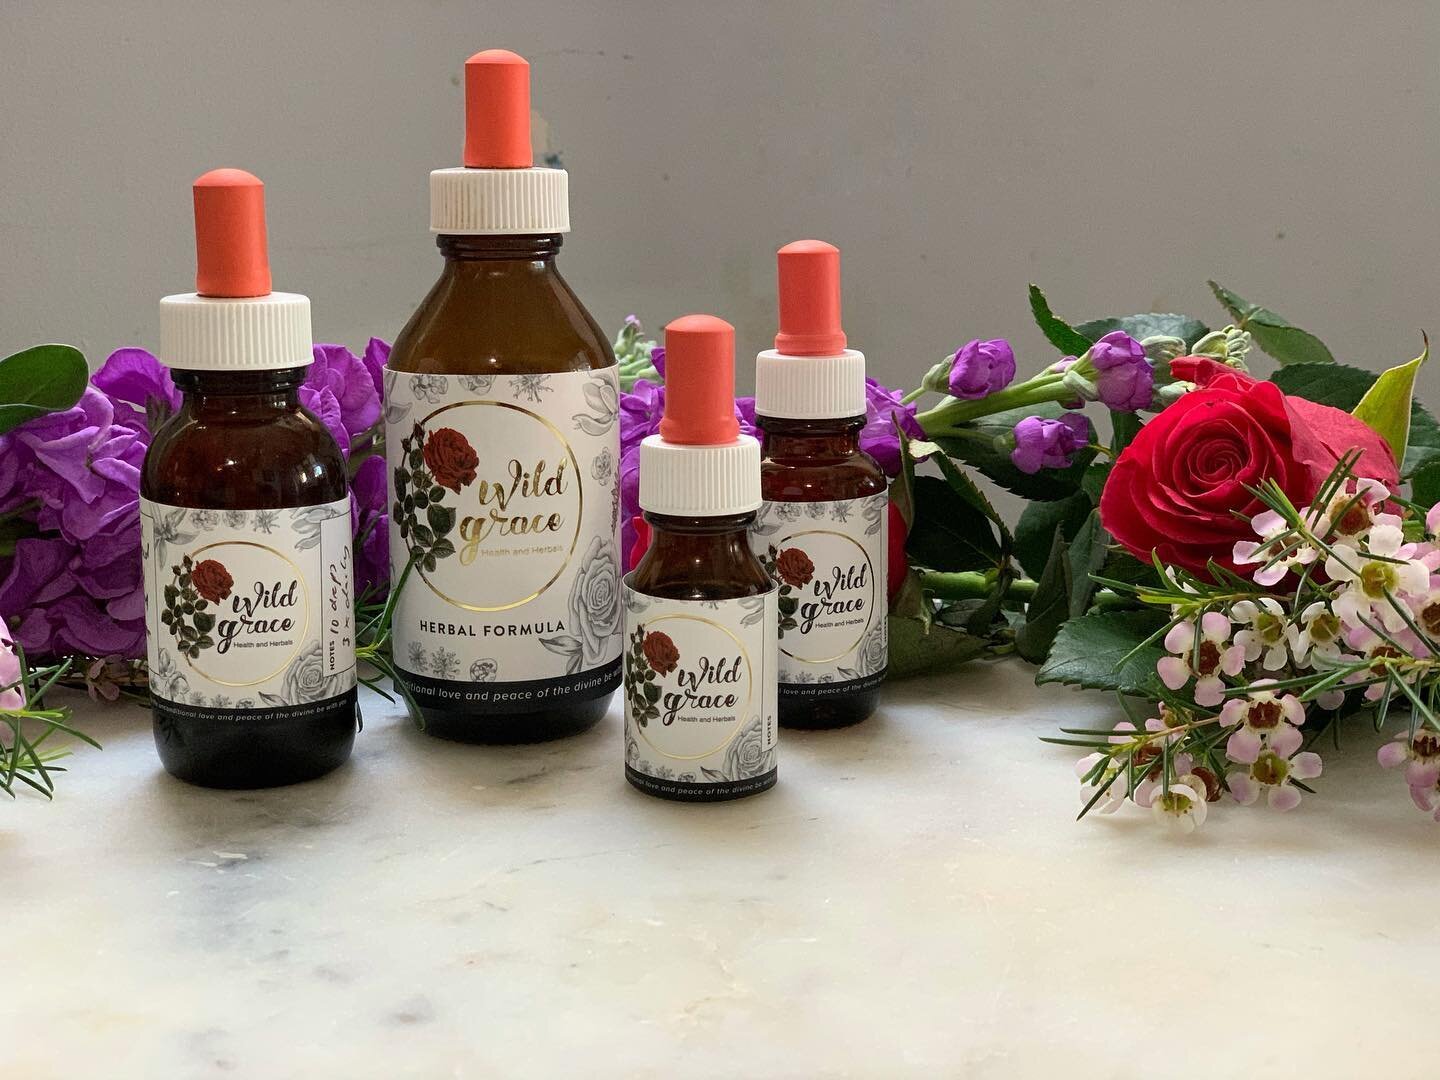 And we have labels 🥰🥰🥰🥰- this was important to me as I am a seeker of beauty - a society that creates beauty is an indication of enlightenment - now my herbs are as divine on the outside as they are on the inside. Adding them to the bottles feels